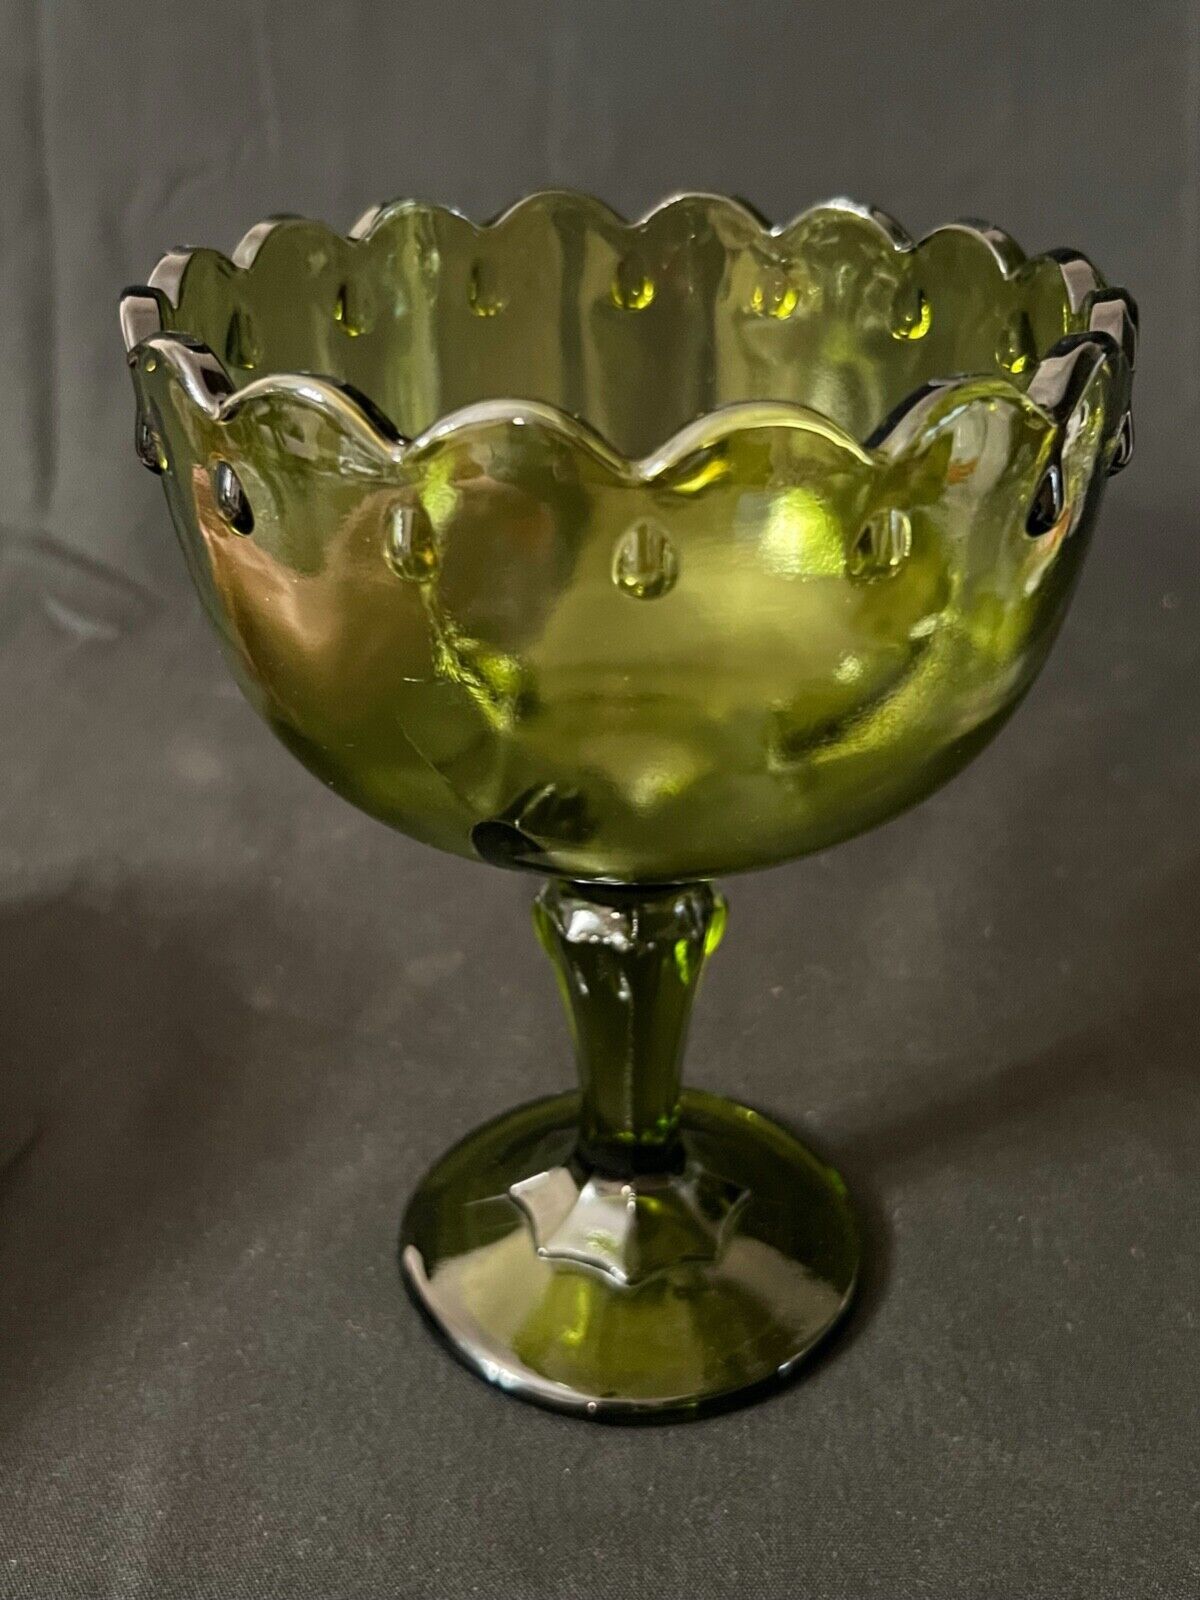 Primary image for Vintage Green Indiana Glass Compote with Teardrop Pattern